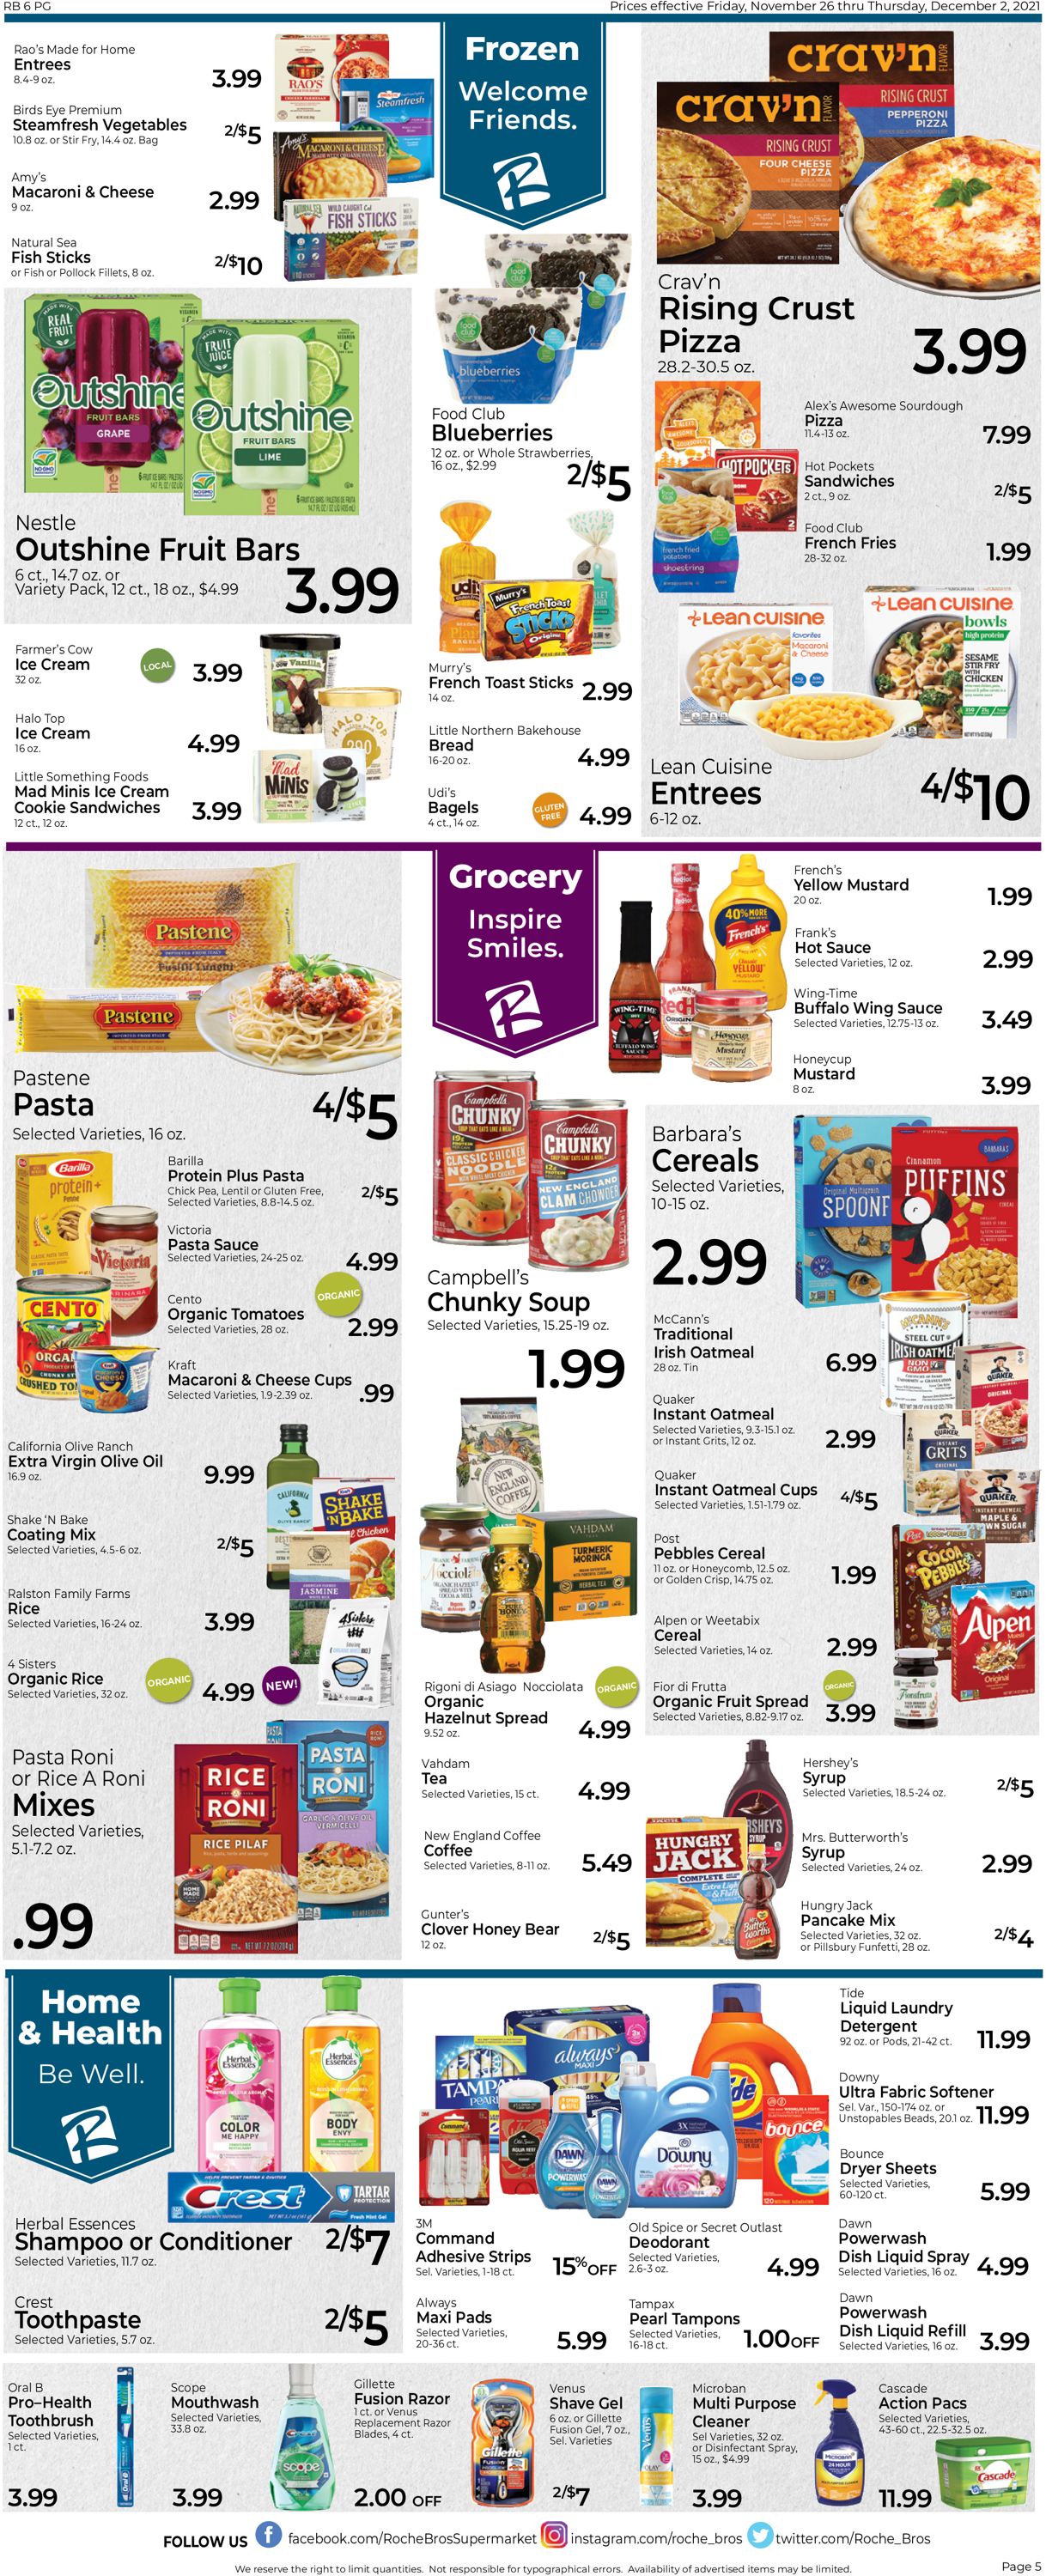 Catalogue Roche Bros. Supermarkets from 11/26/2021